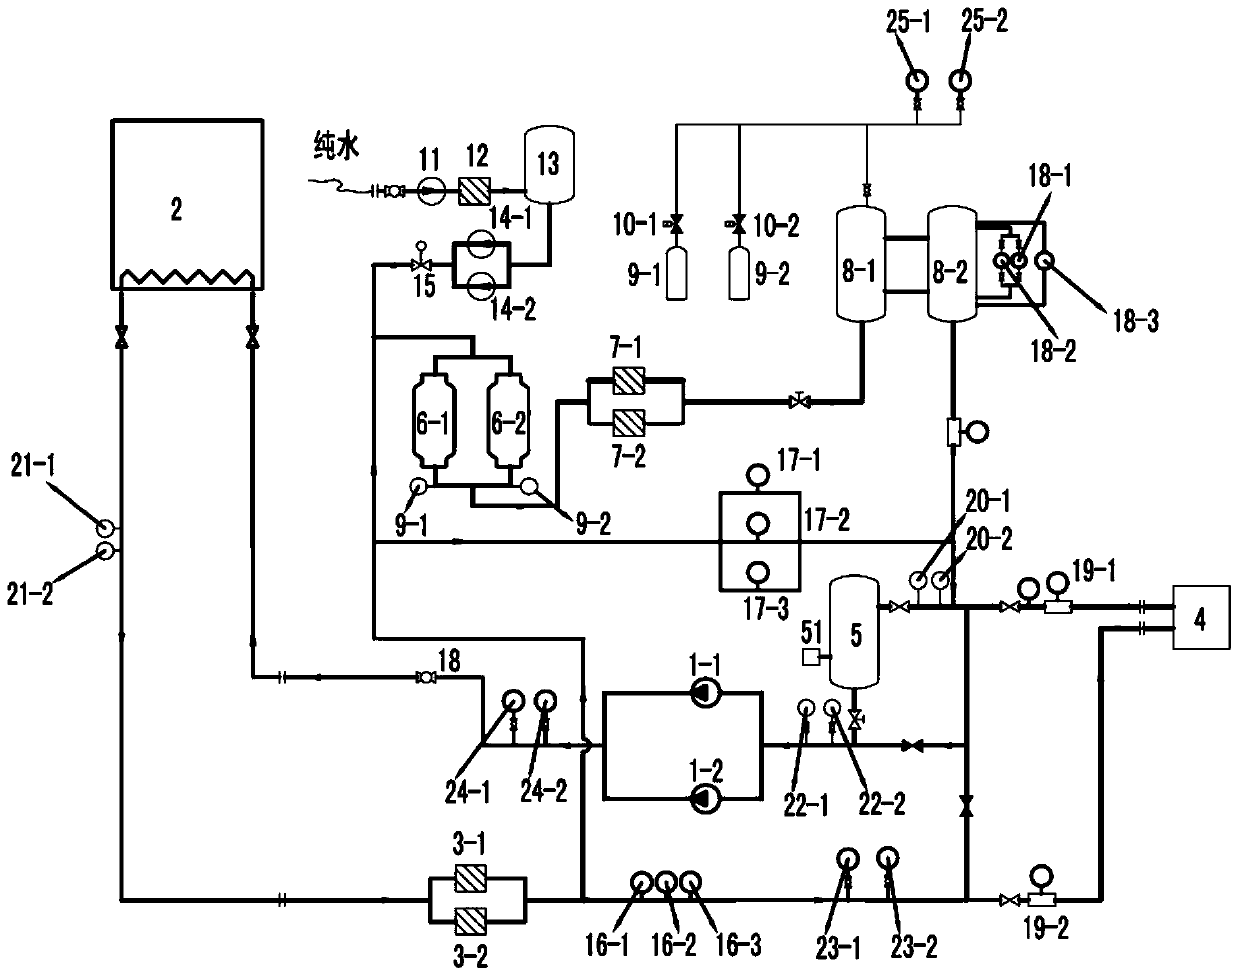 A flexible DC power transmission converter valve water-cooling system for islands